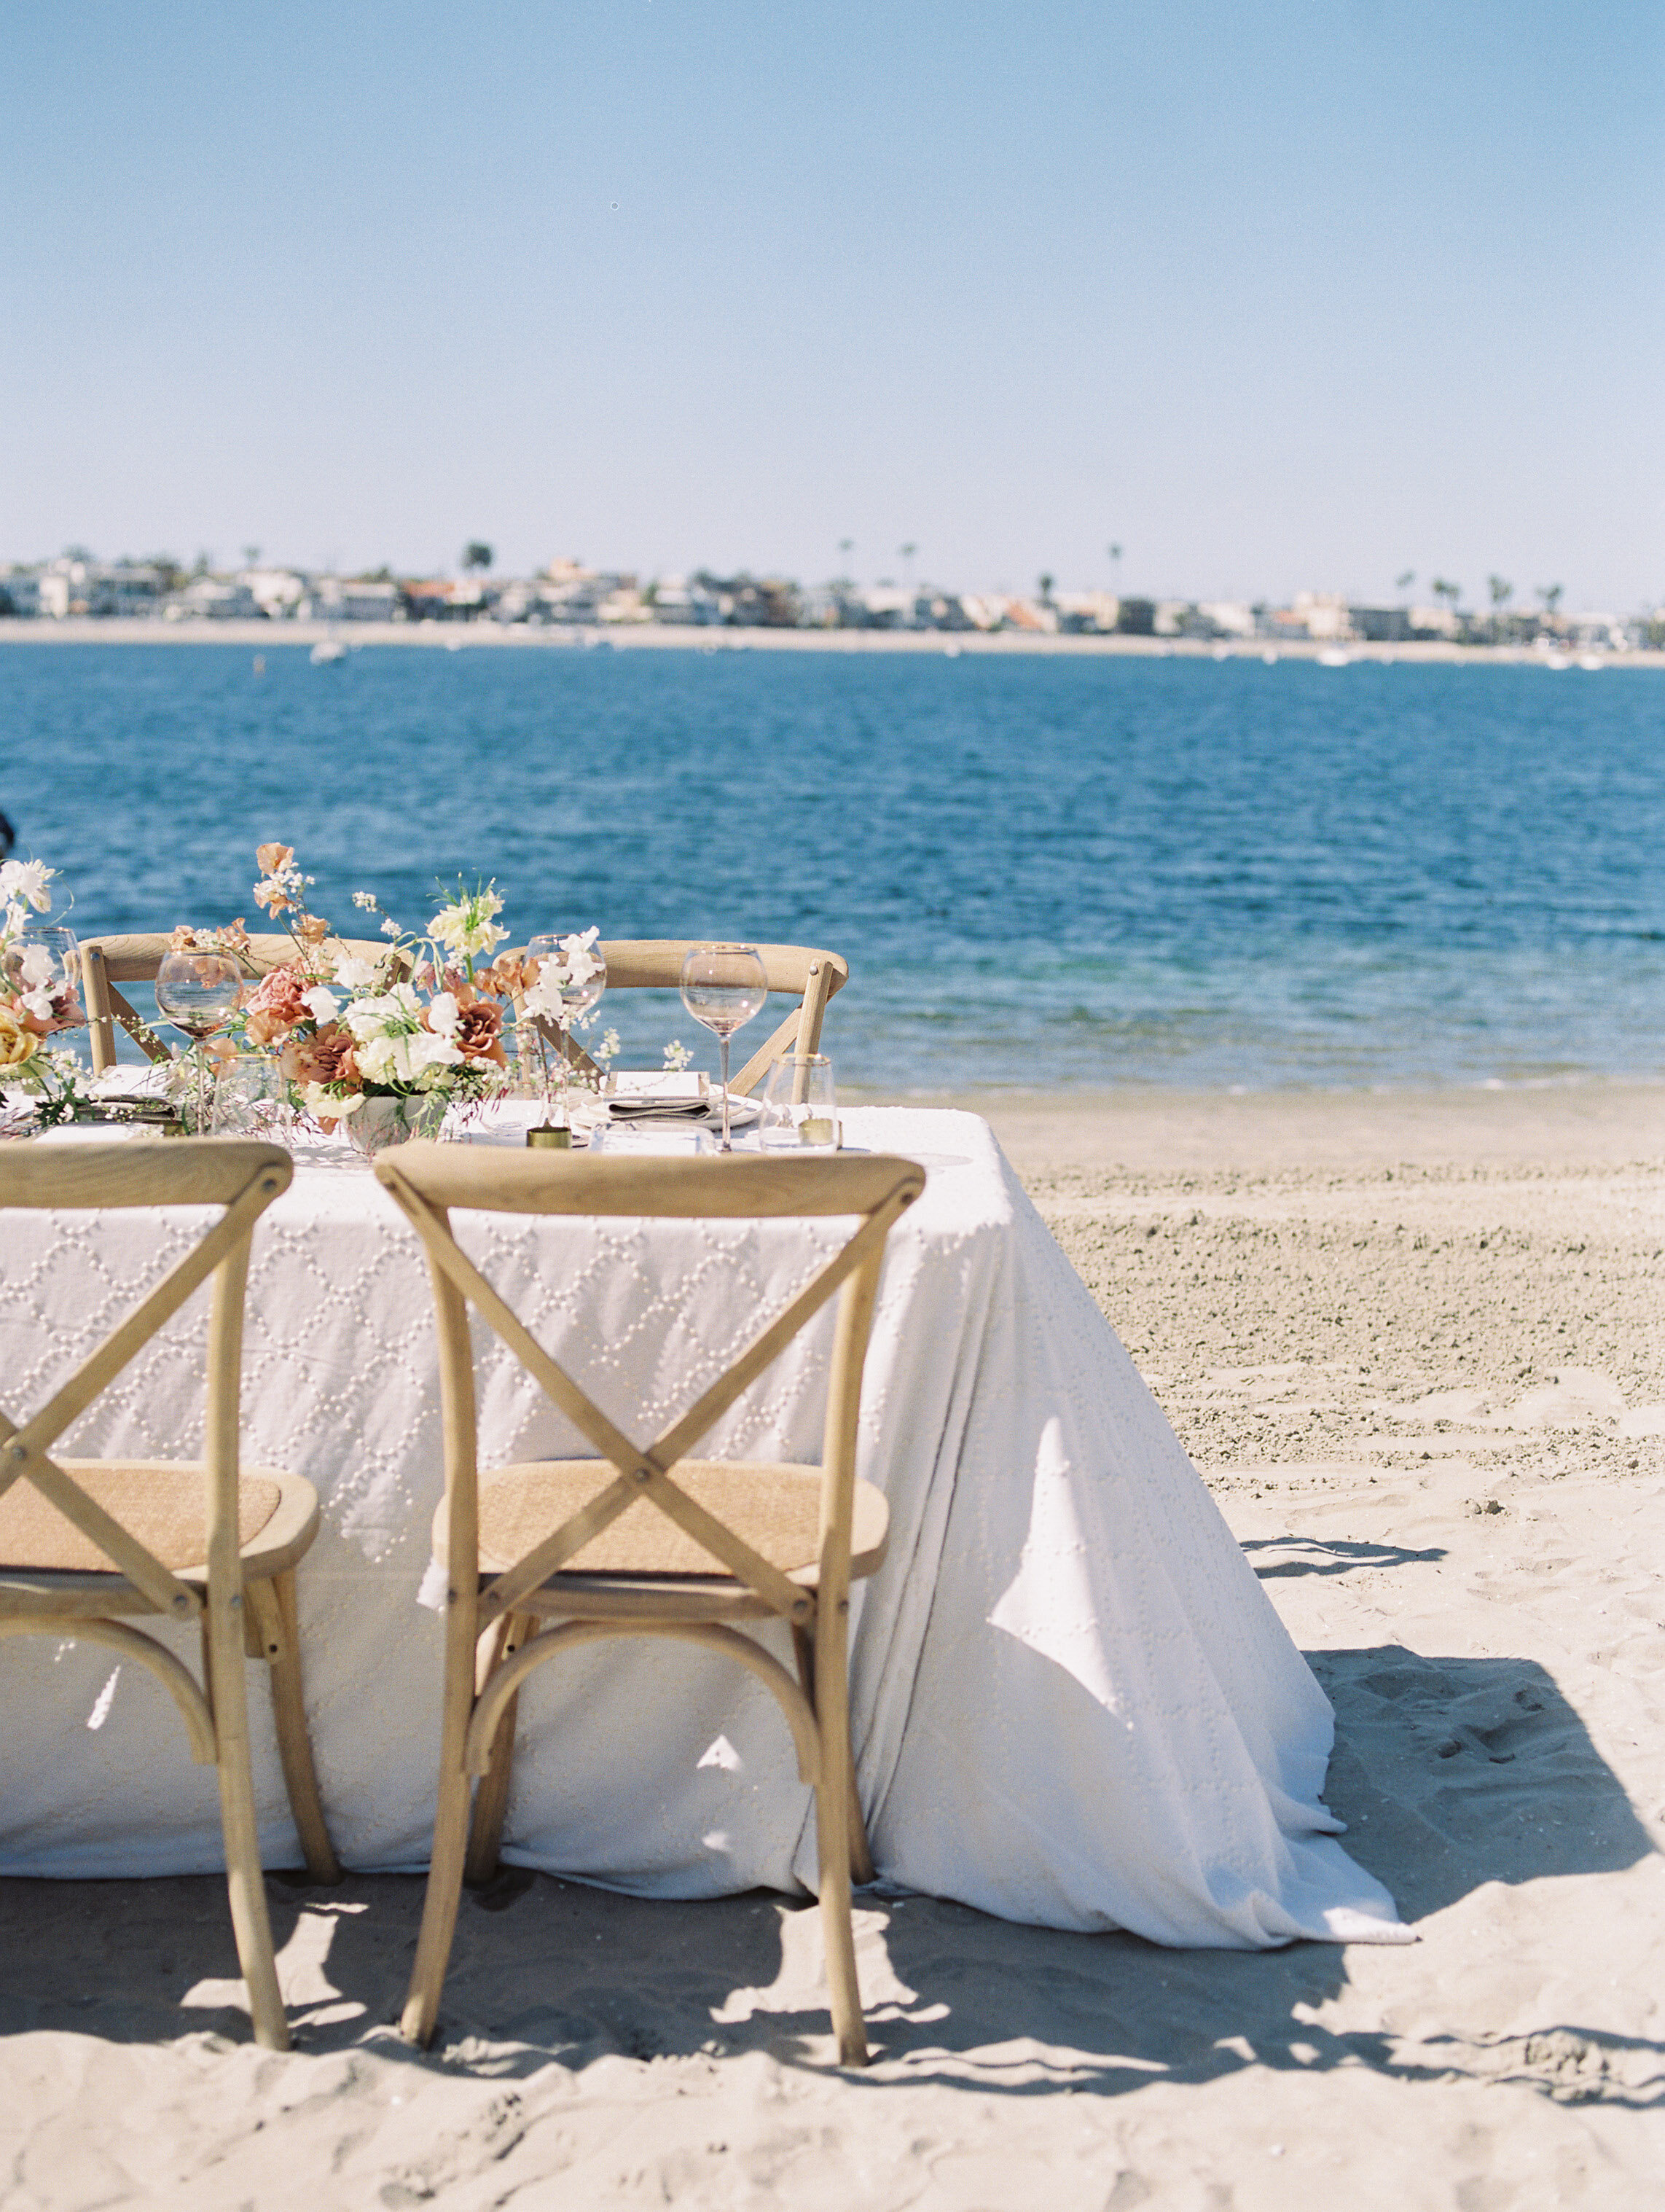 Refined and elegant destination fine art wedding on the beach in San Diego, California with Galia Lahav gown by Liz Andolina Photography